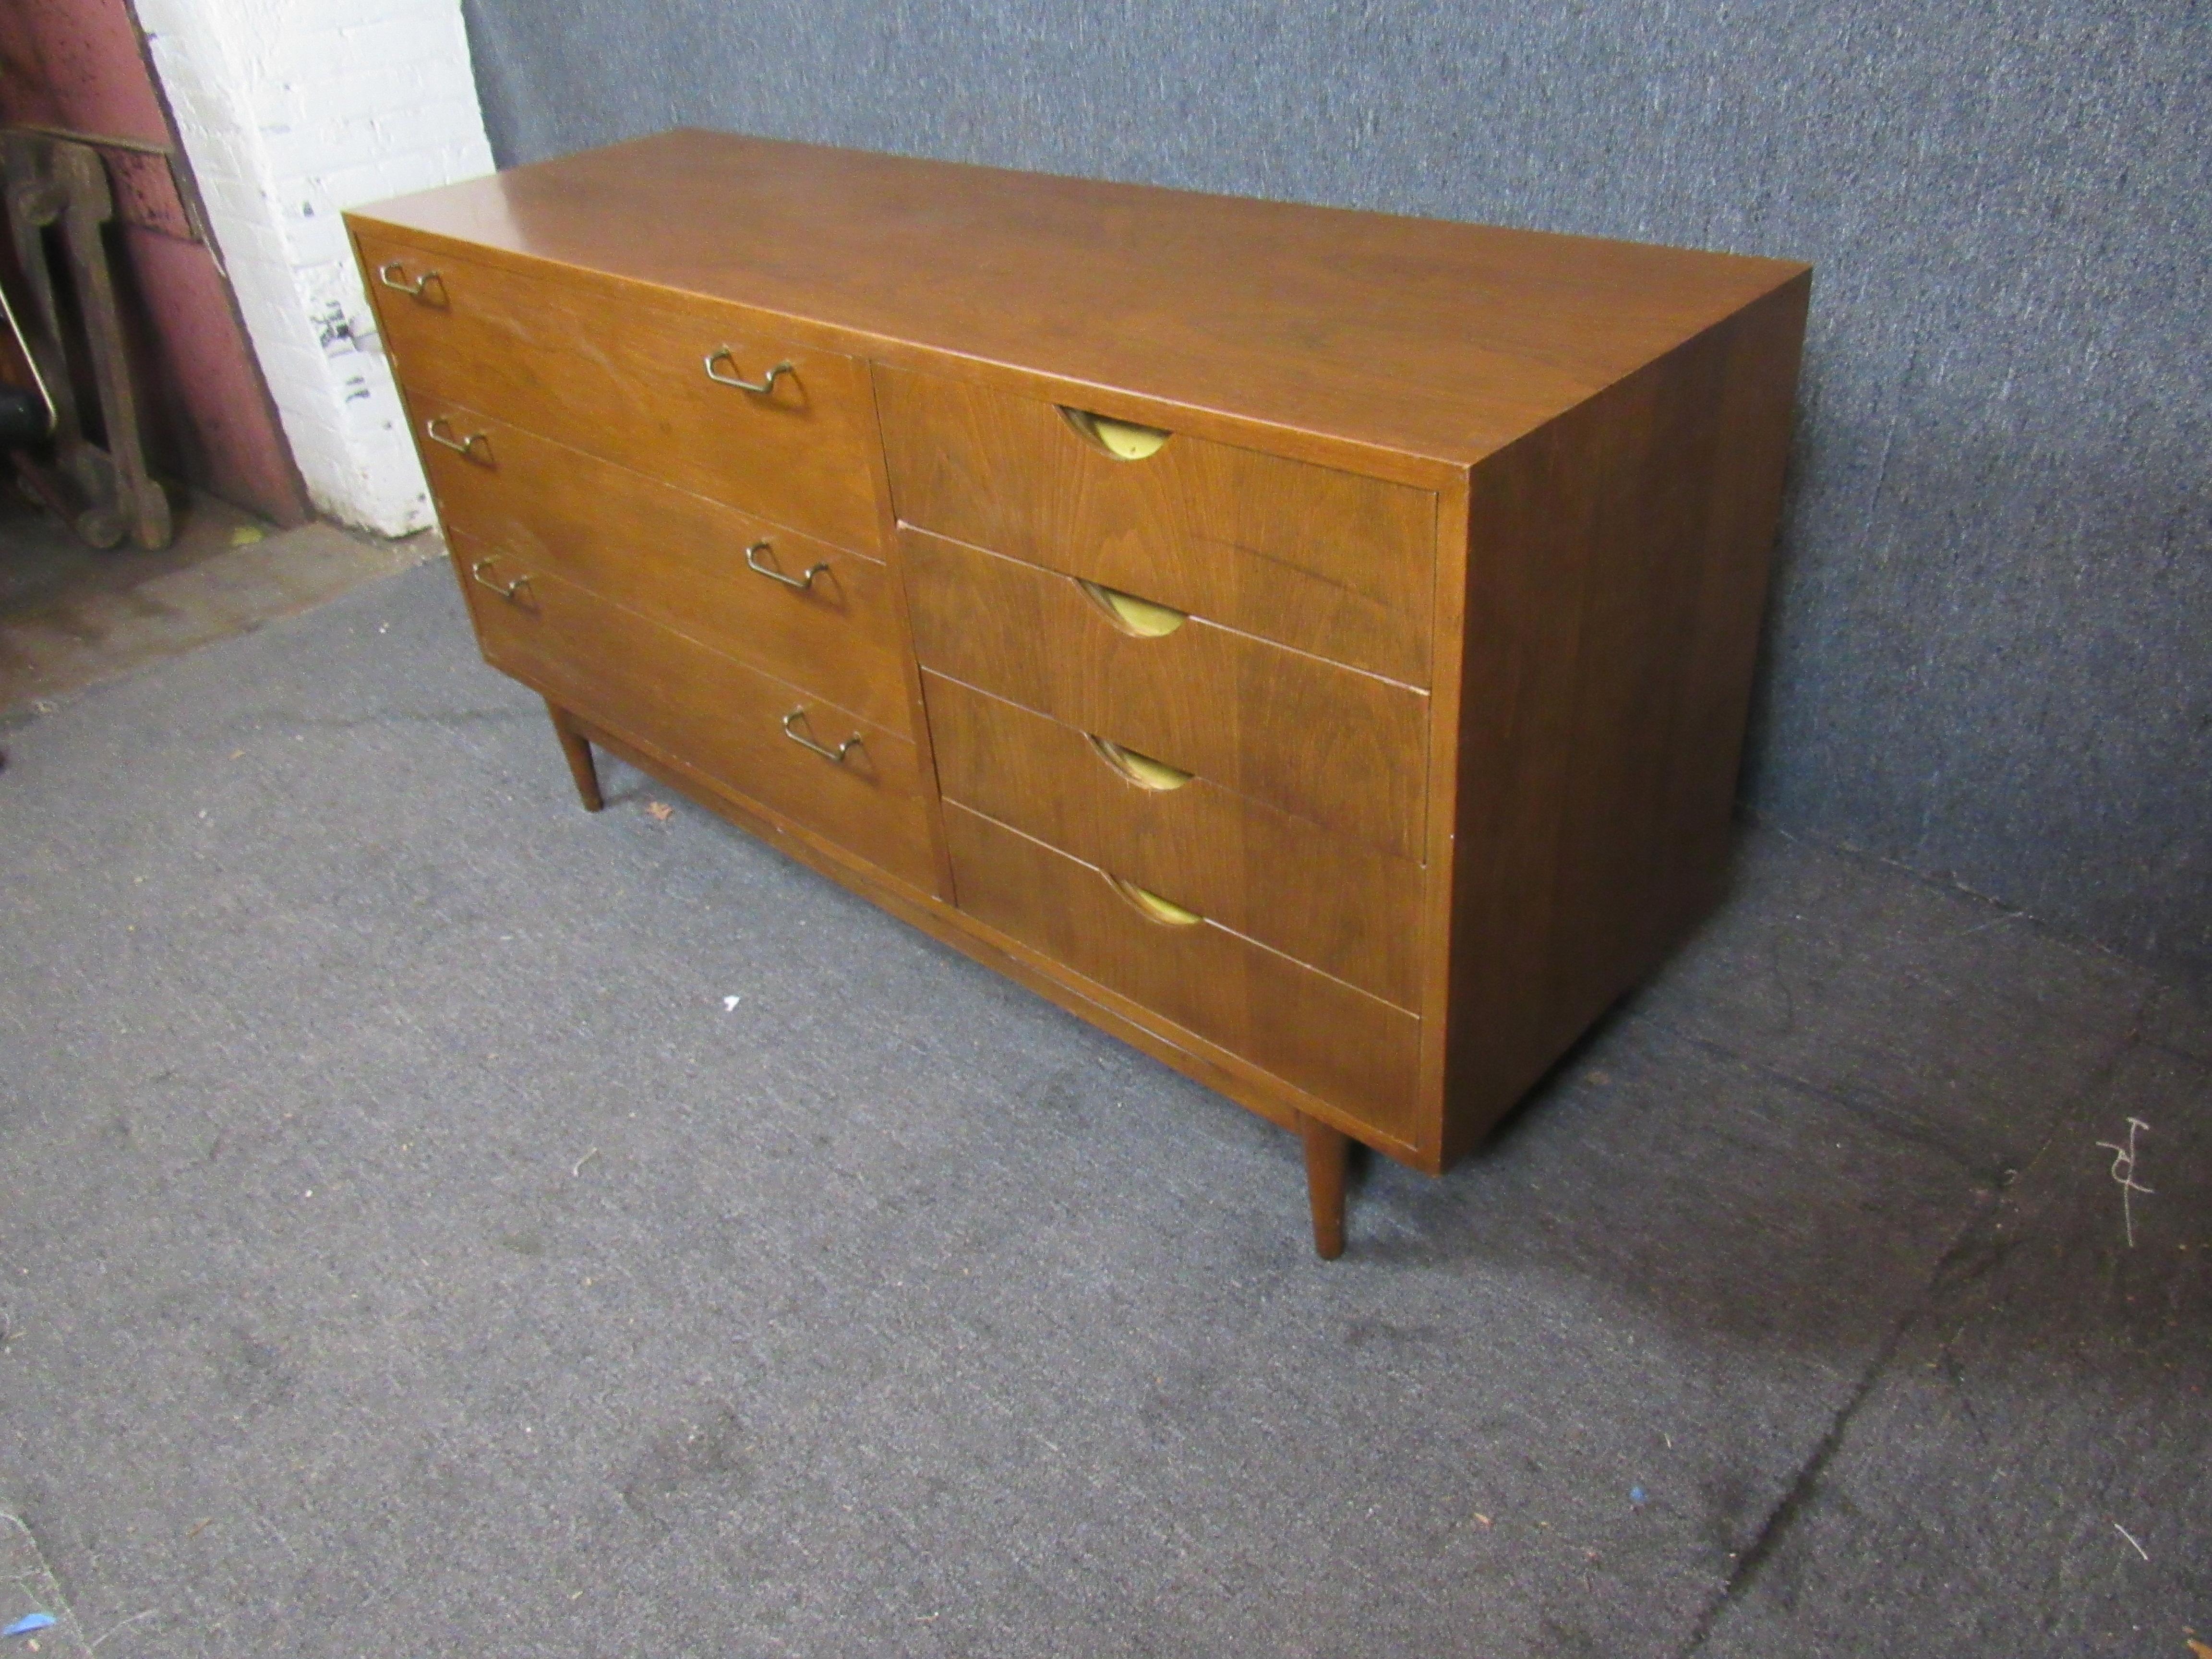 Beautiful and practical mid-century vintage sideboard from the world-renowned American of Martinsville furniture makers. Seven large pull-out drawers offer plenty of storage space, for the home or office. A rich walnut wood grain pairs perfectly